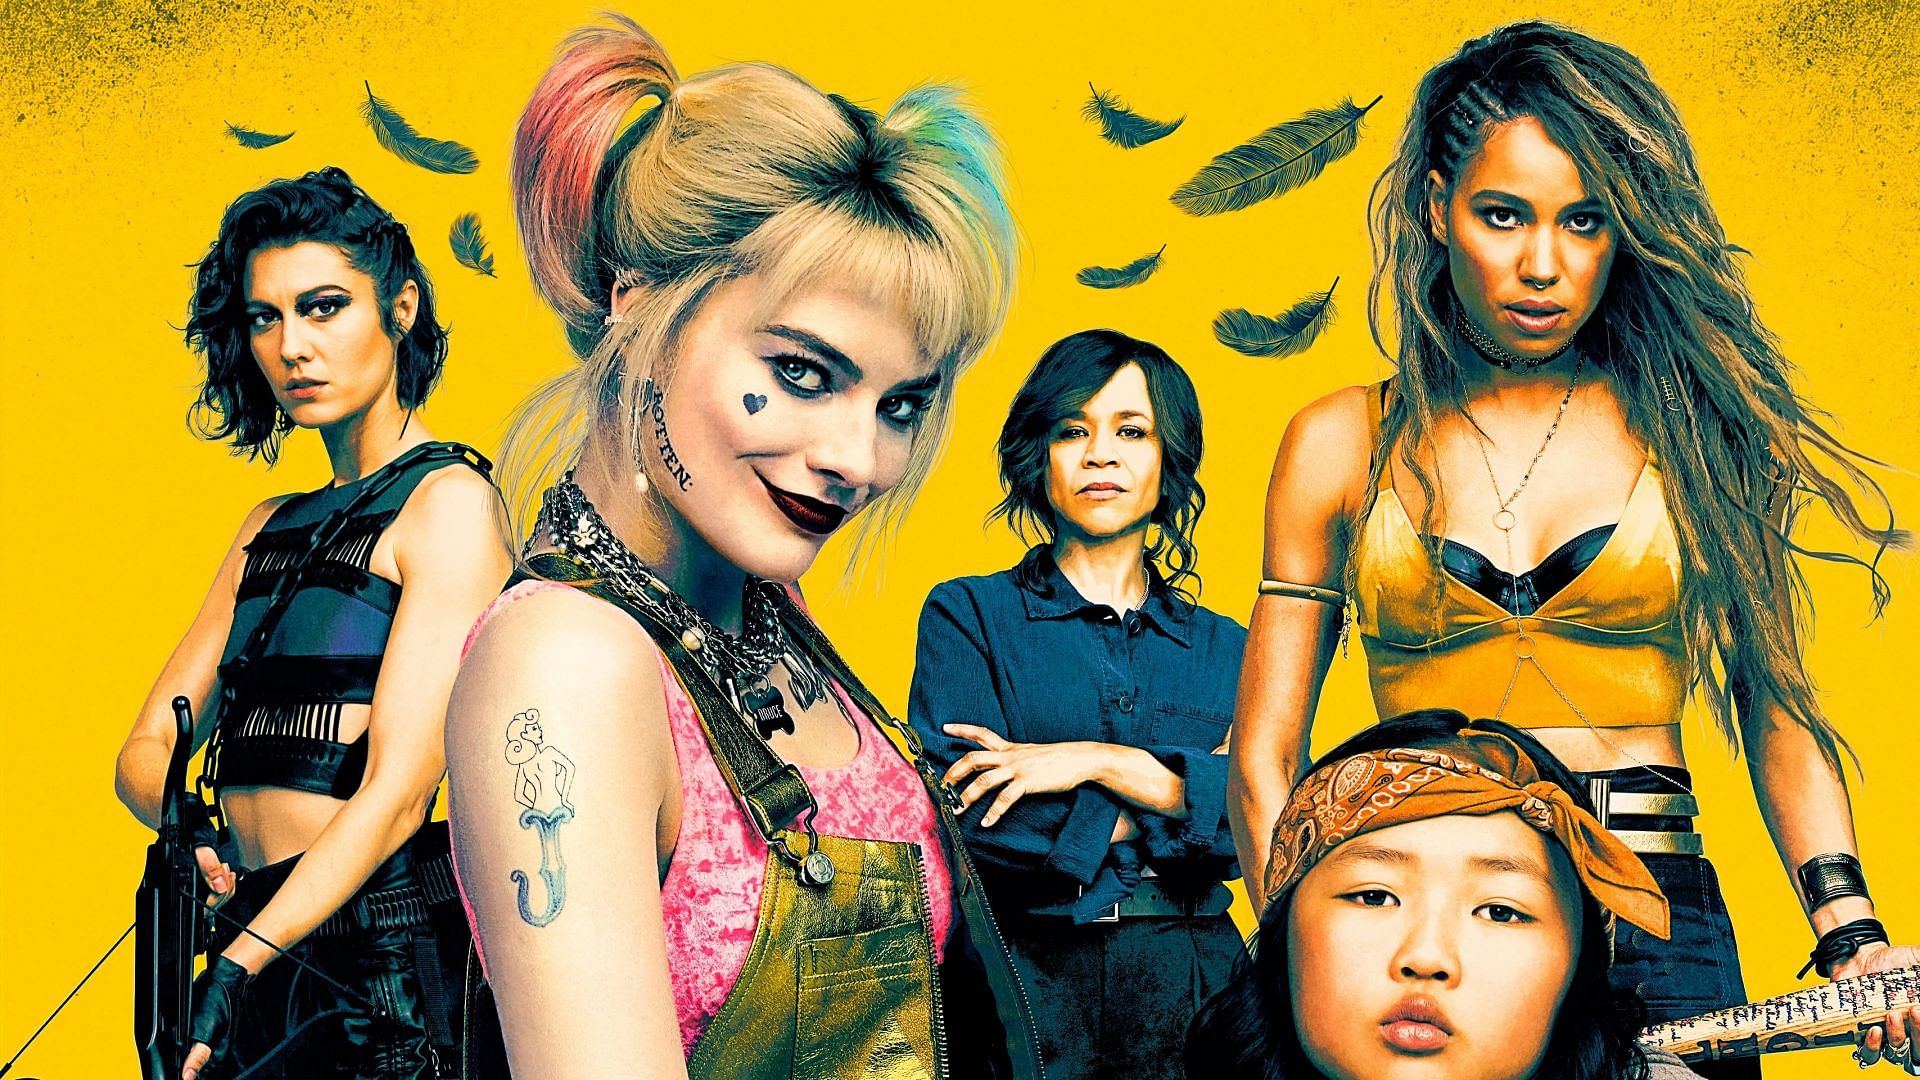 Birds of Prey 2 release date, cast, plot - all you need to know